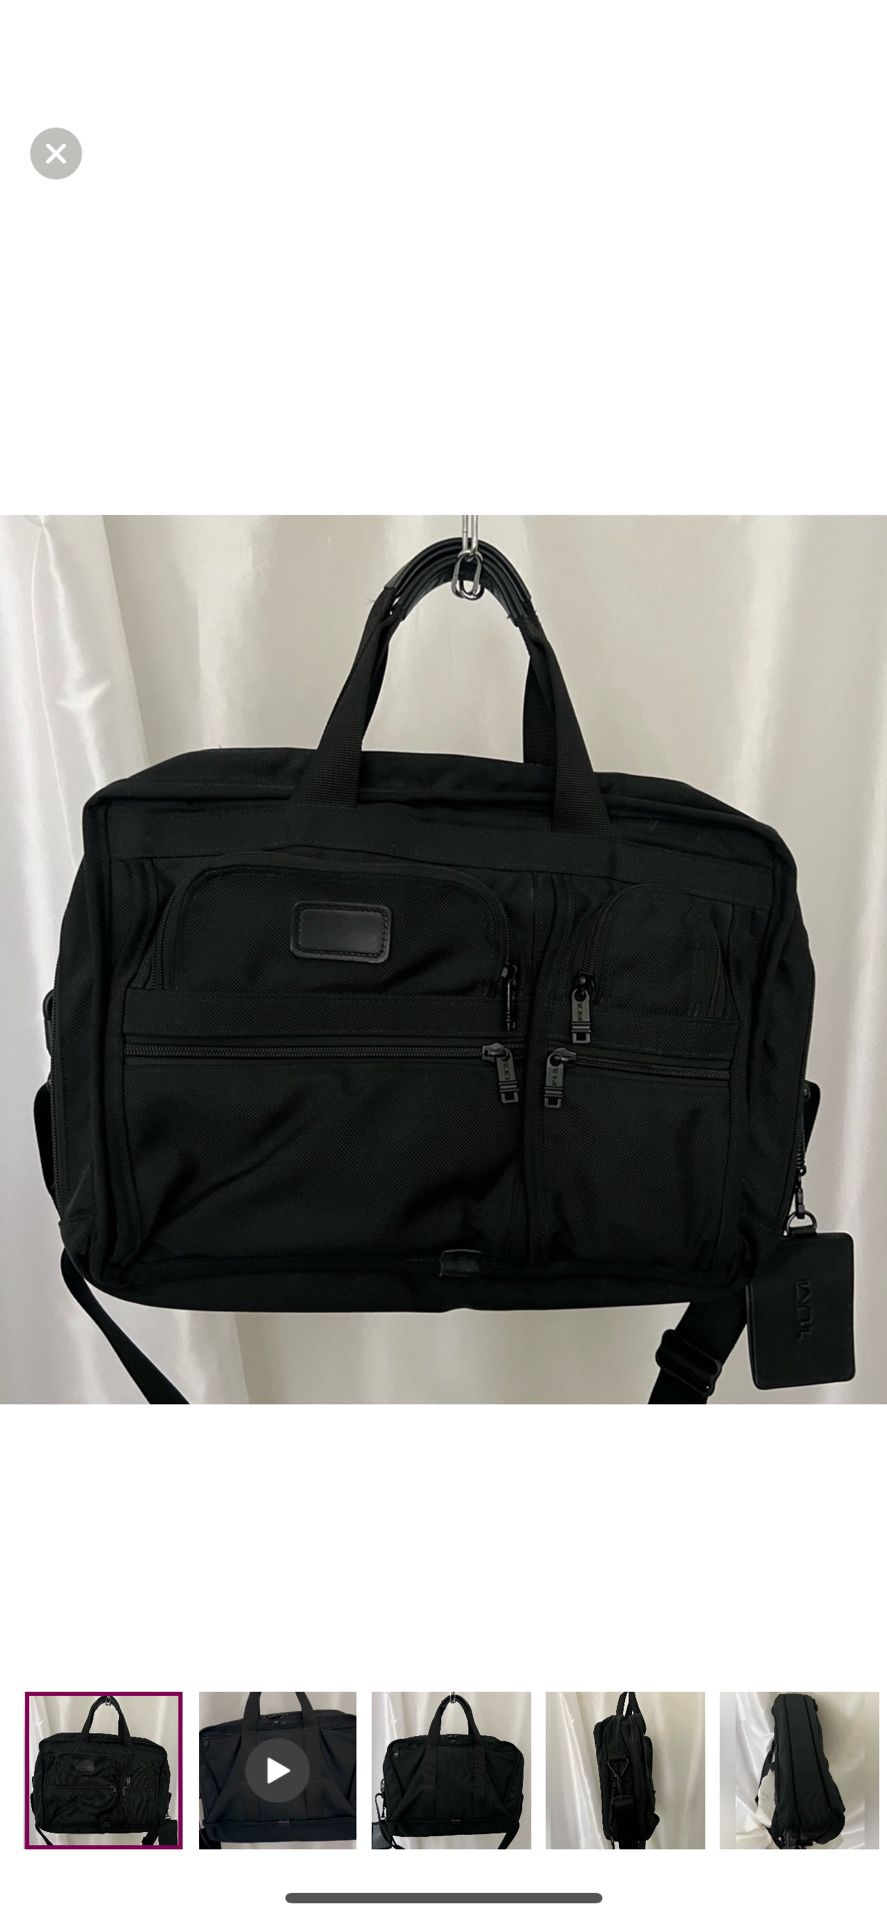 TUMI Alpha Expendendable Messenger bag. EXCELLENT CONDITION! Near new. With no flaws.